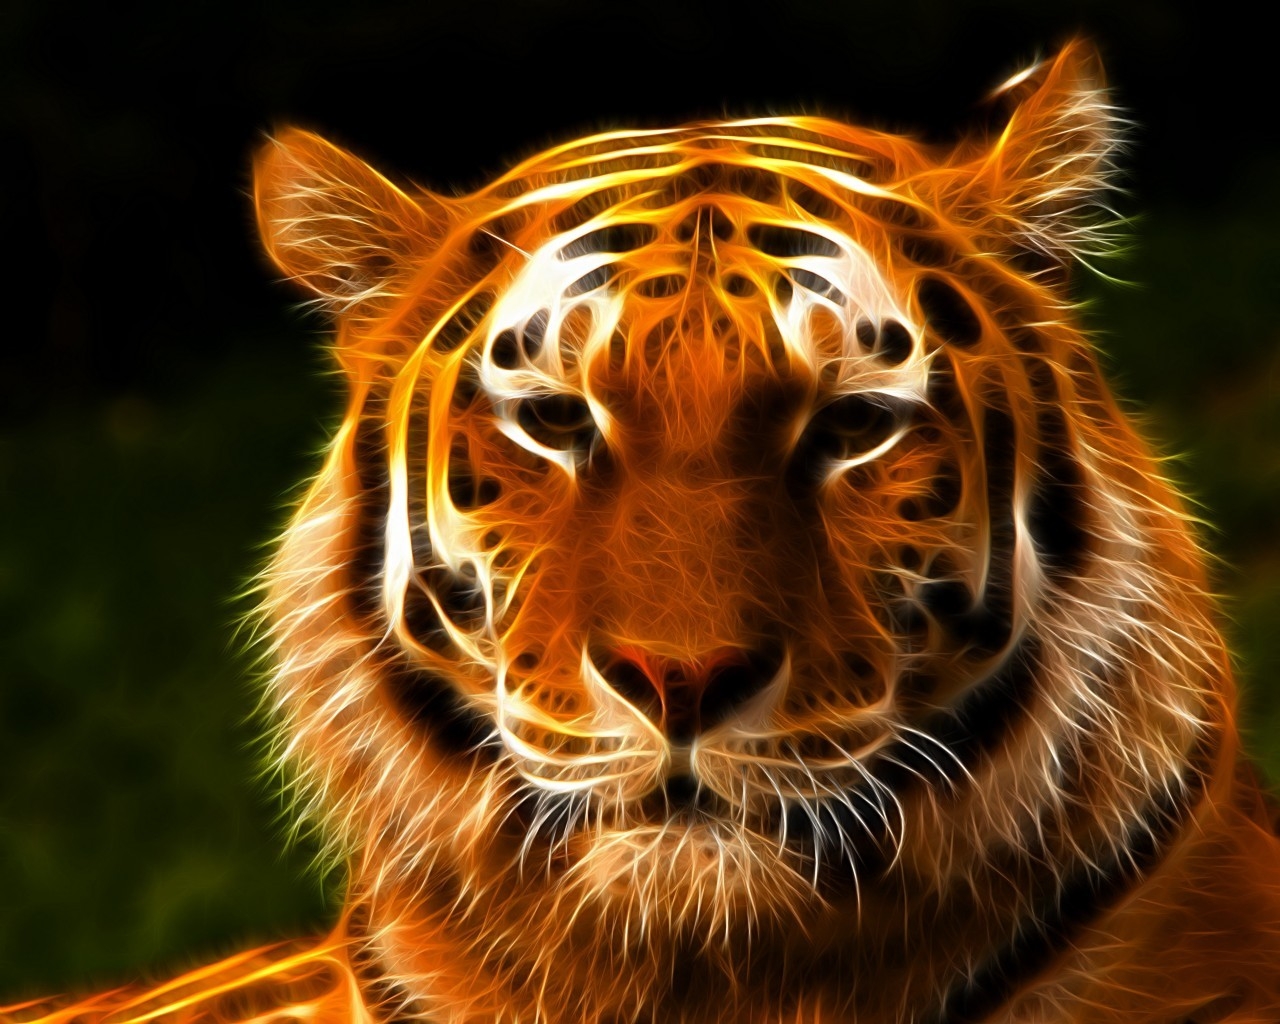 Tiger Face Art for 1280 x 1024 resolution